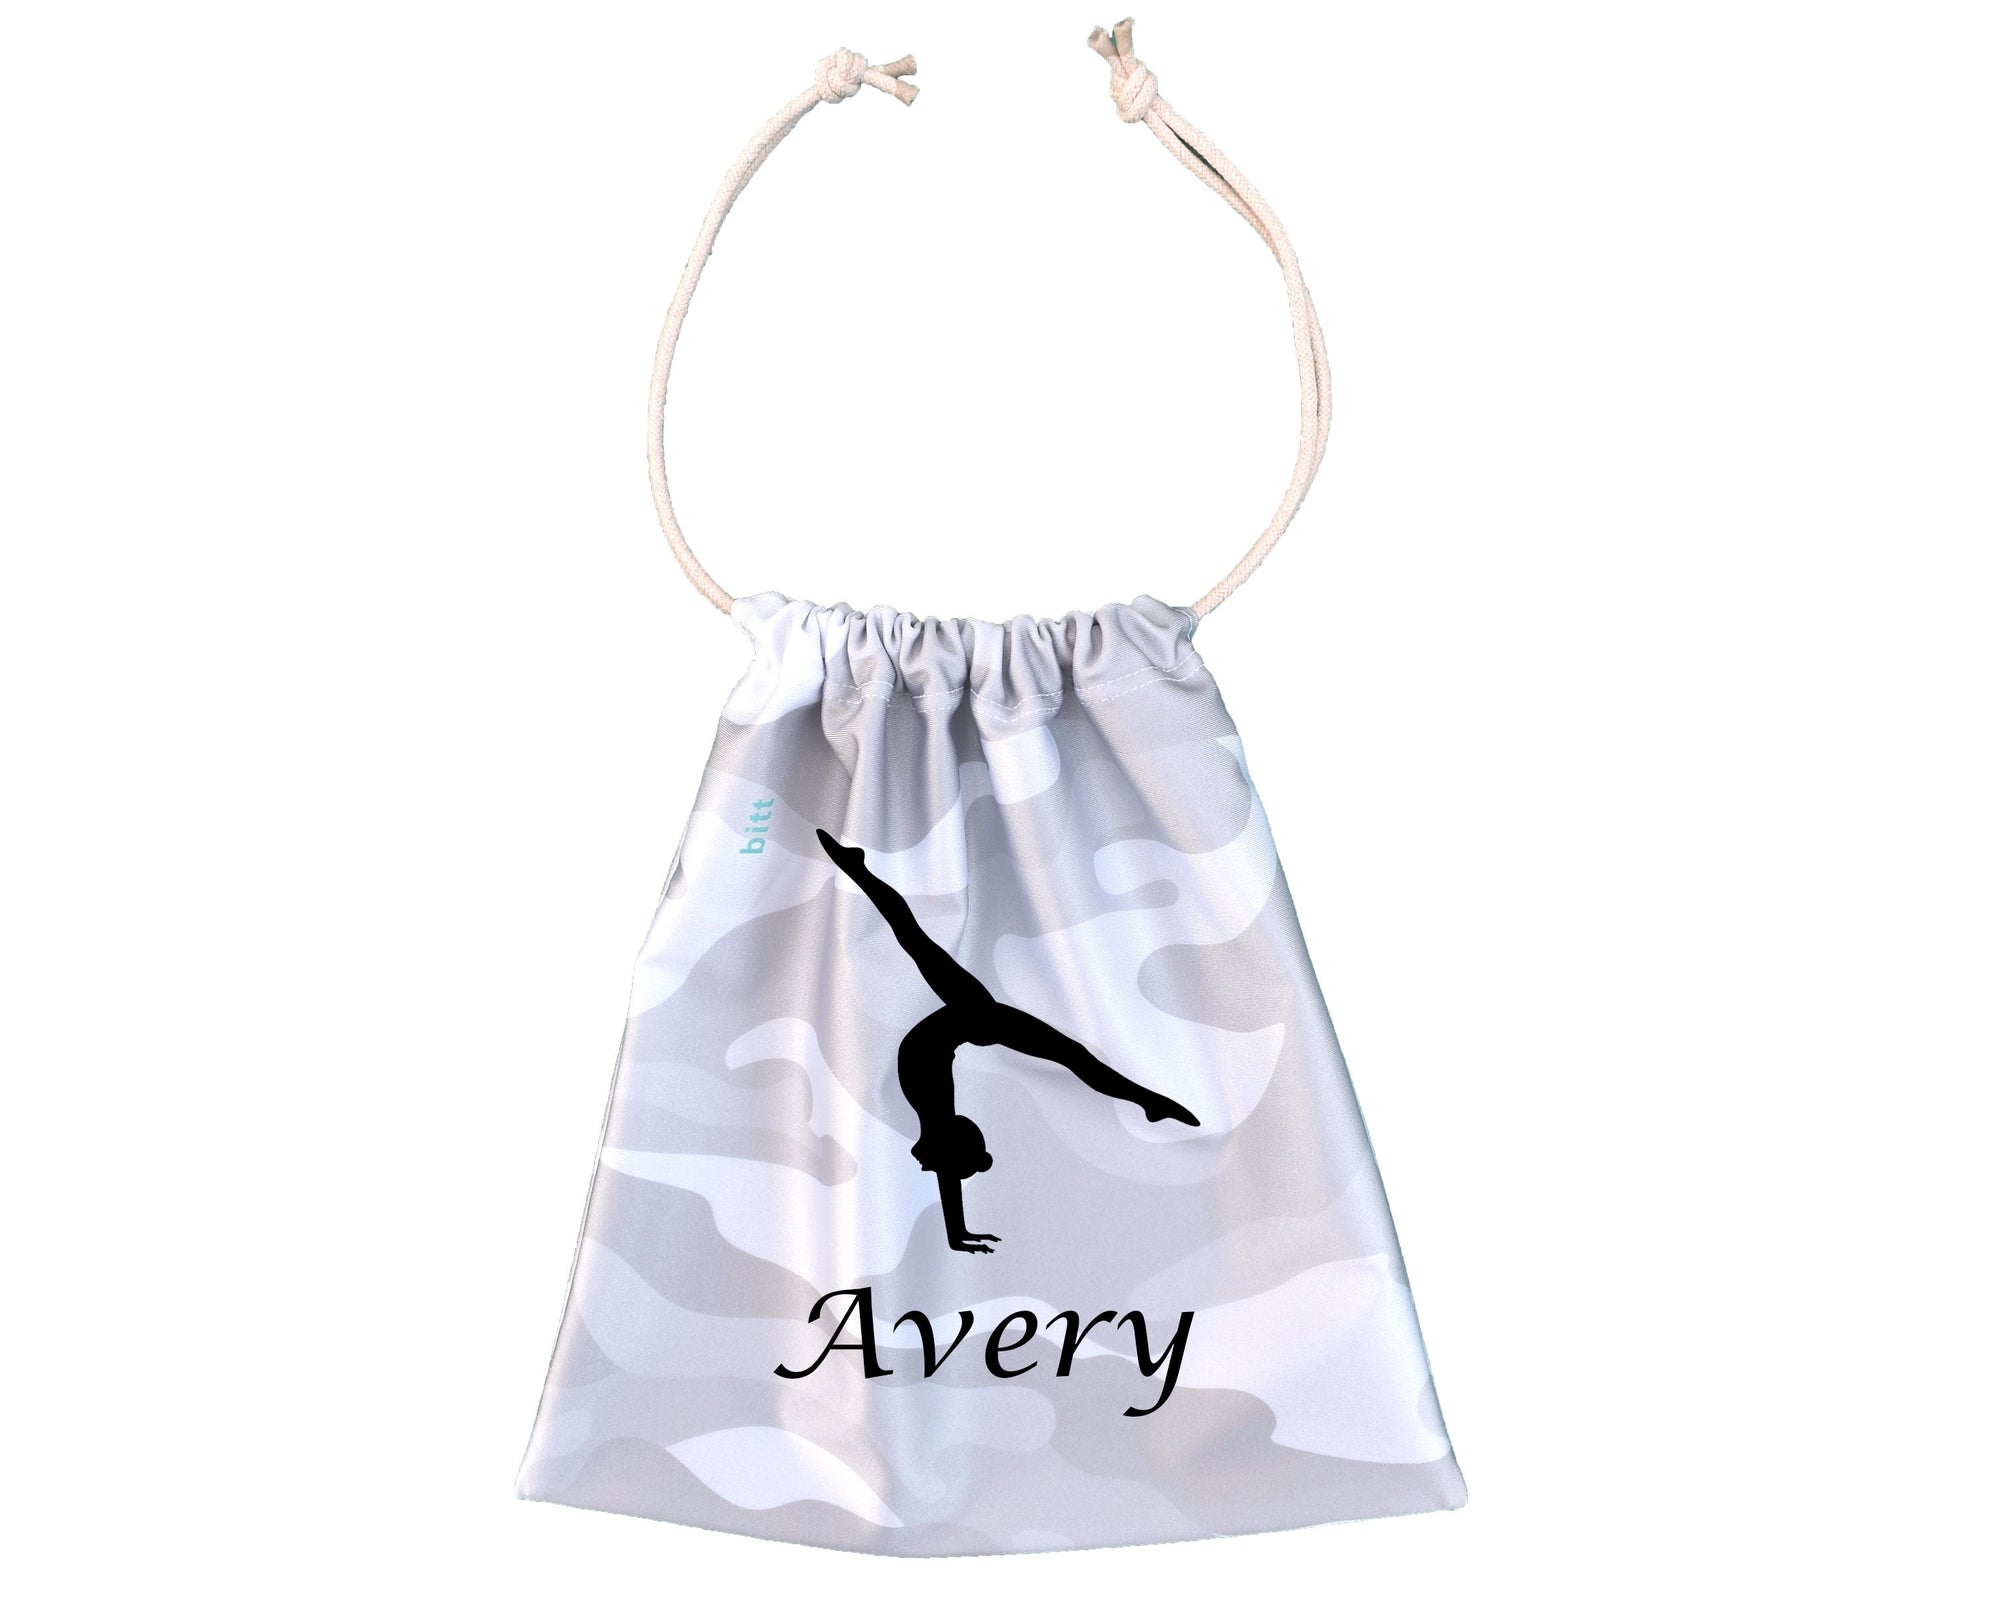 Personalized Gymnastics Grip Bag in Silver White Camouflage with Handstand